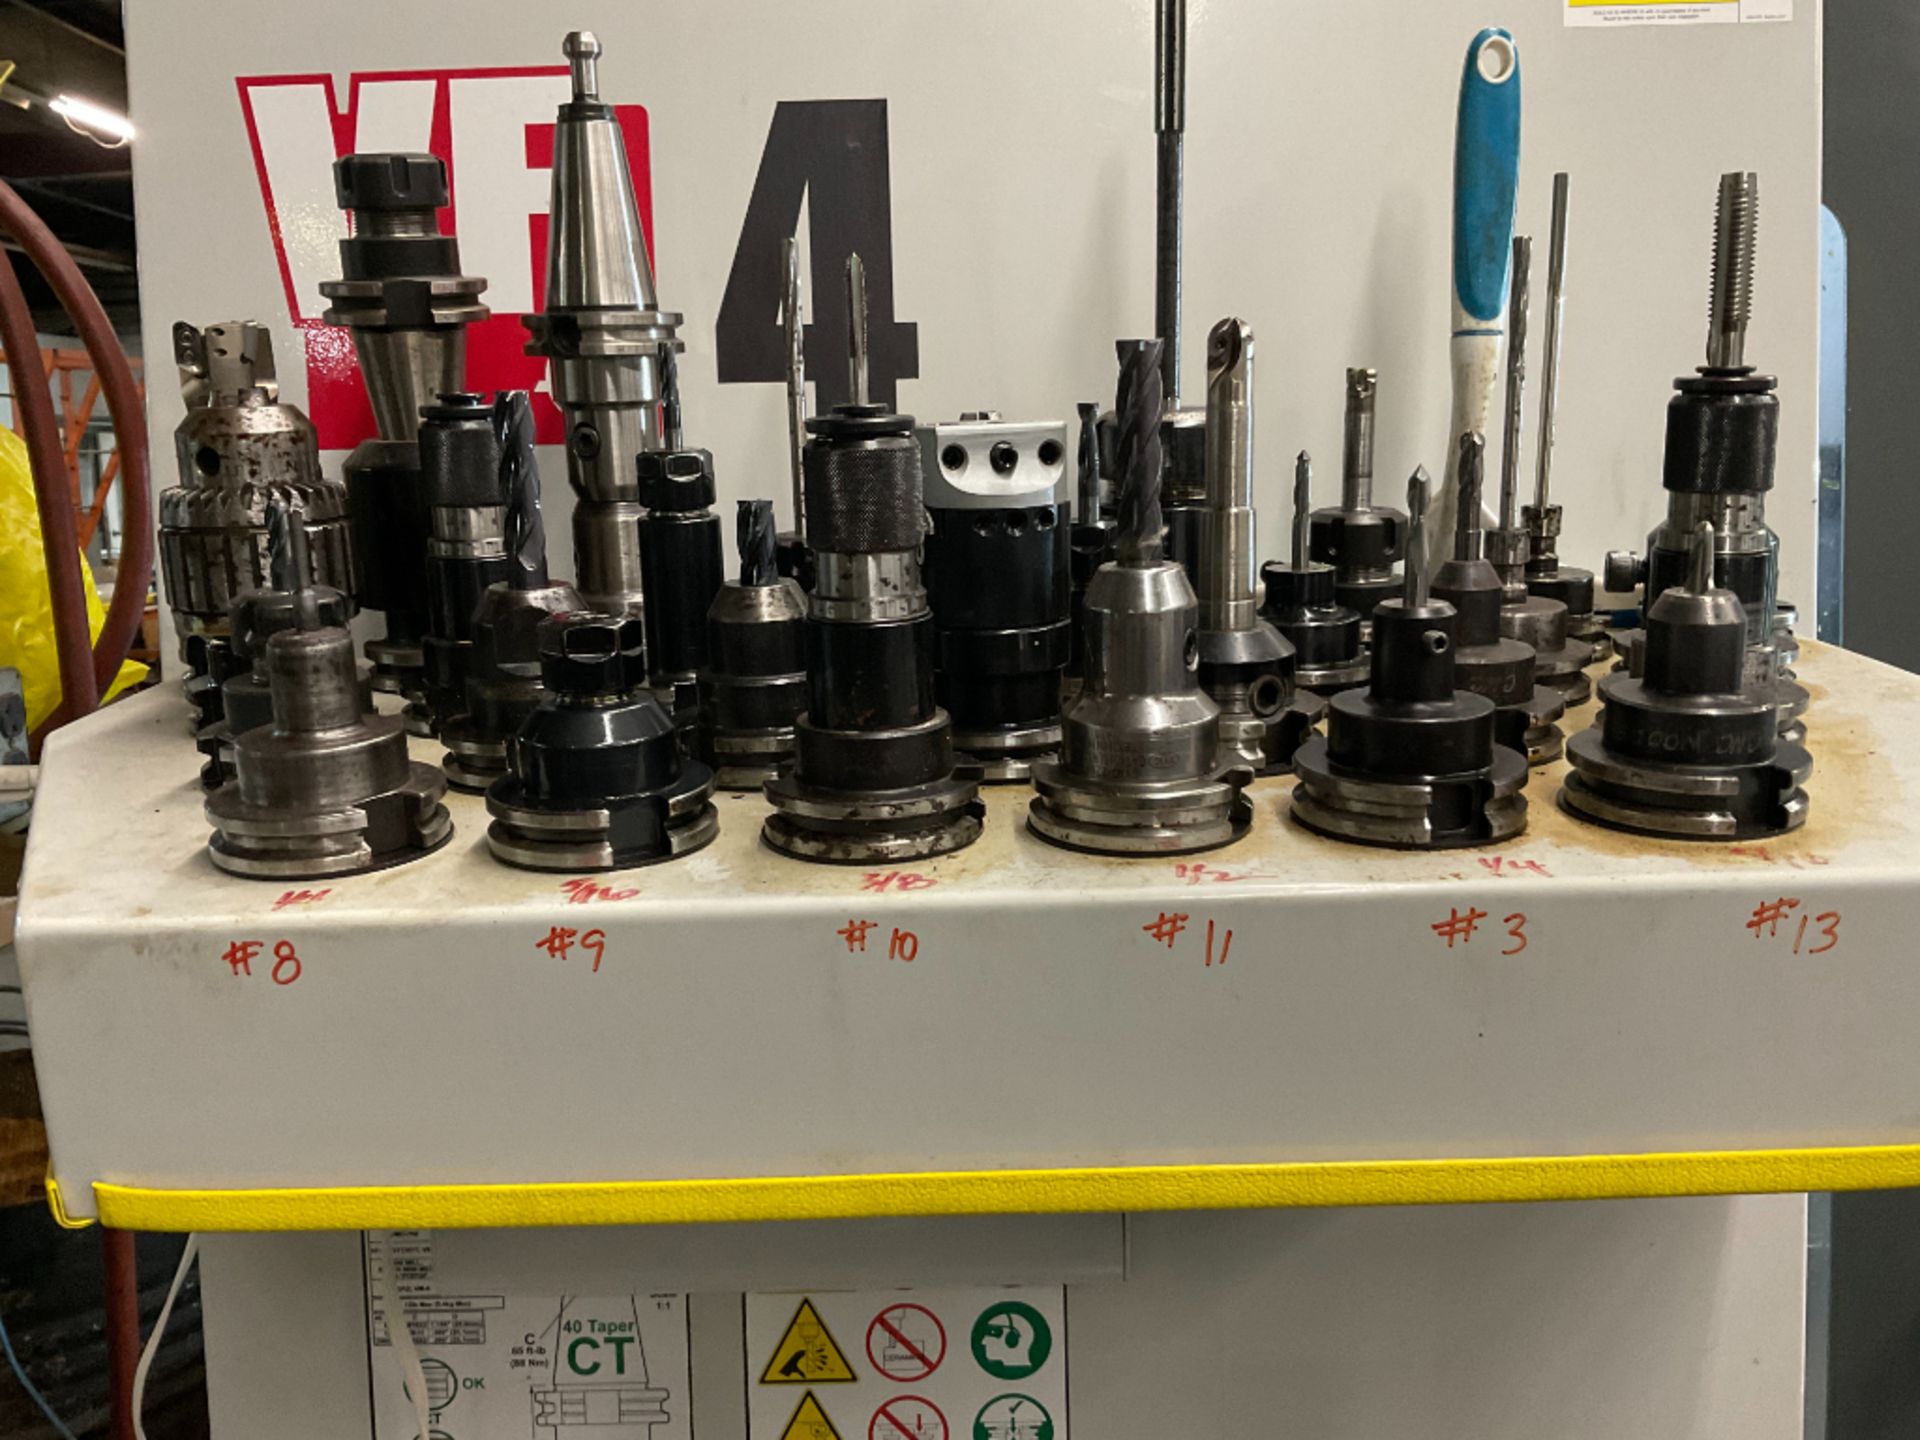 Cat 40 Tooling - From Haas